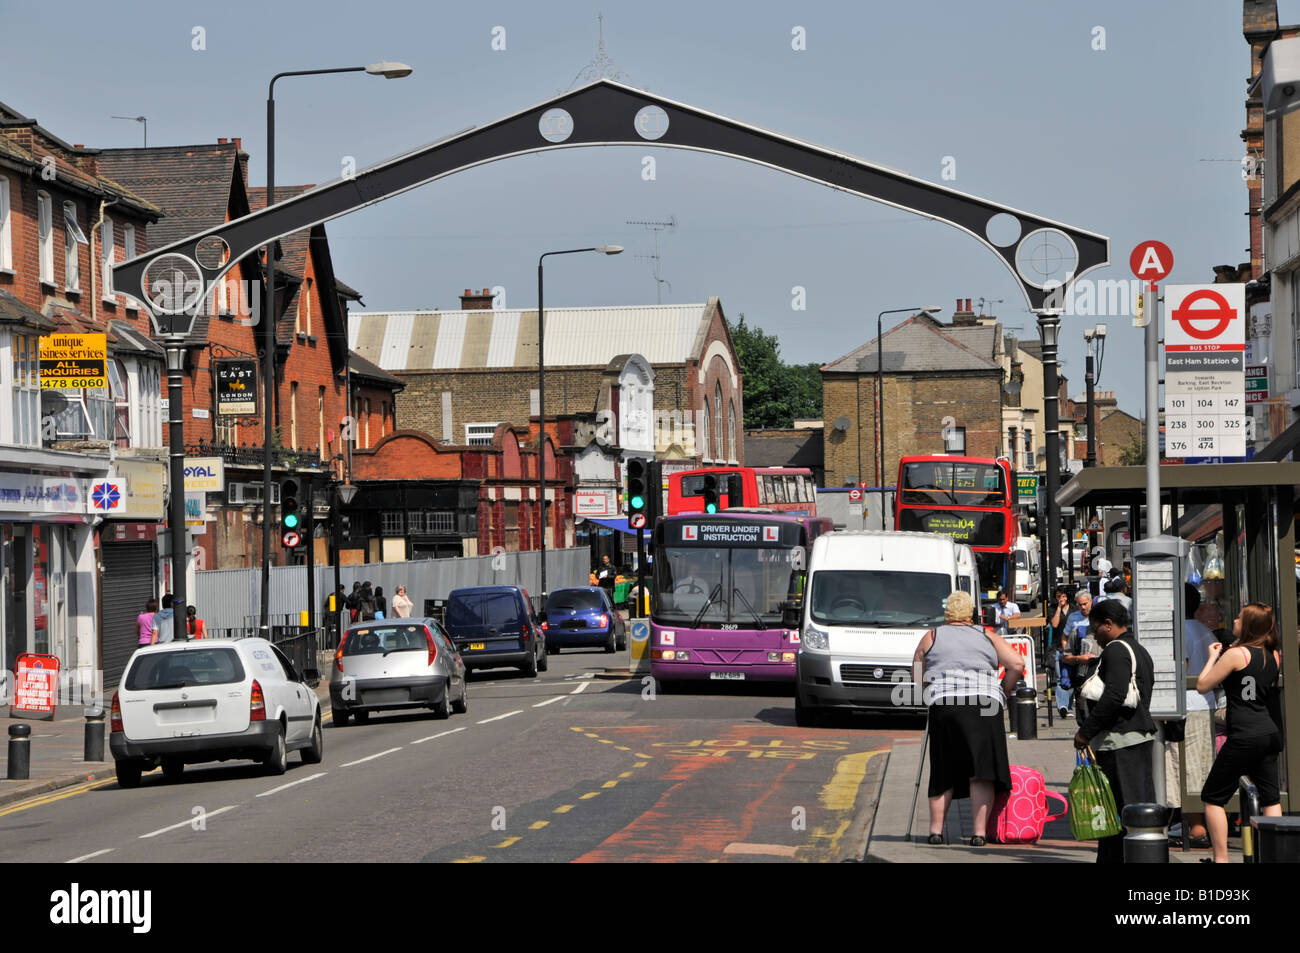 Arch spanning across road on start of East Ham shoppers High Street Stock Photo